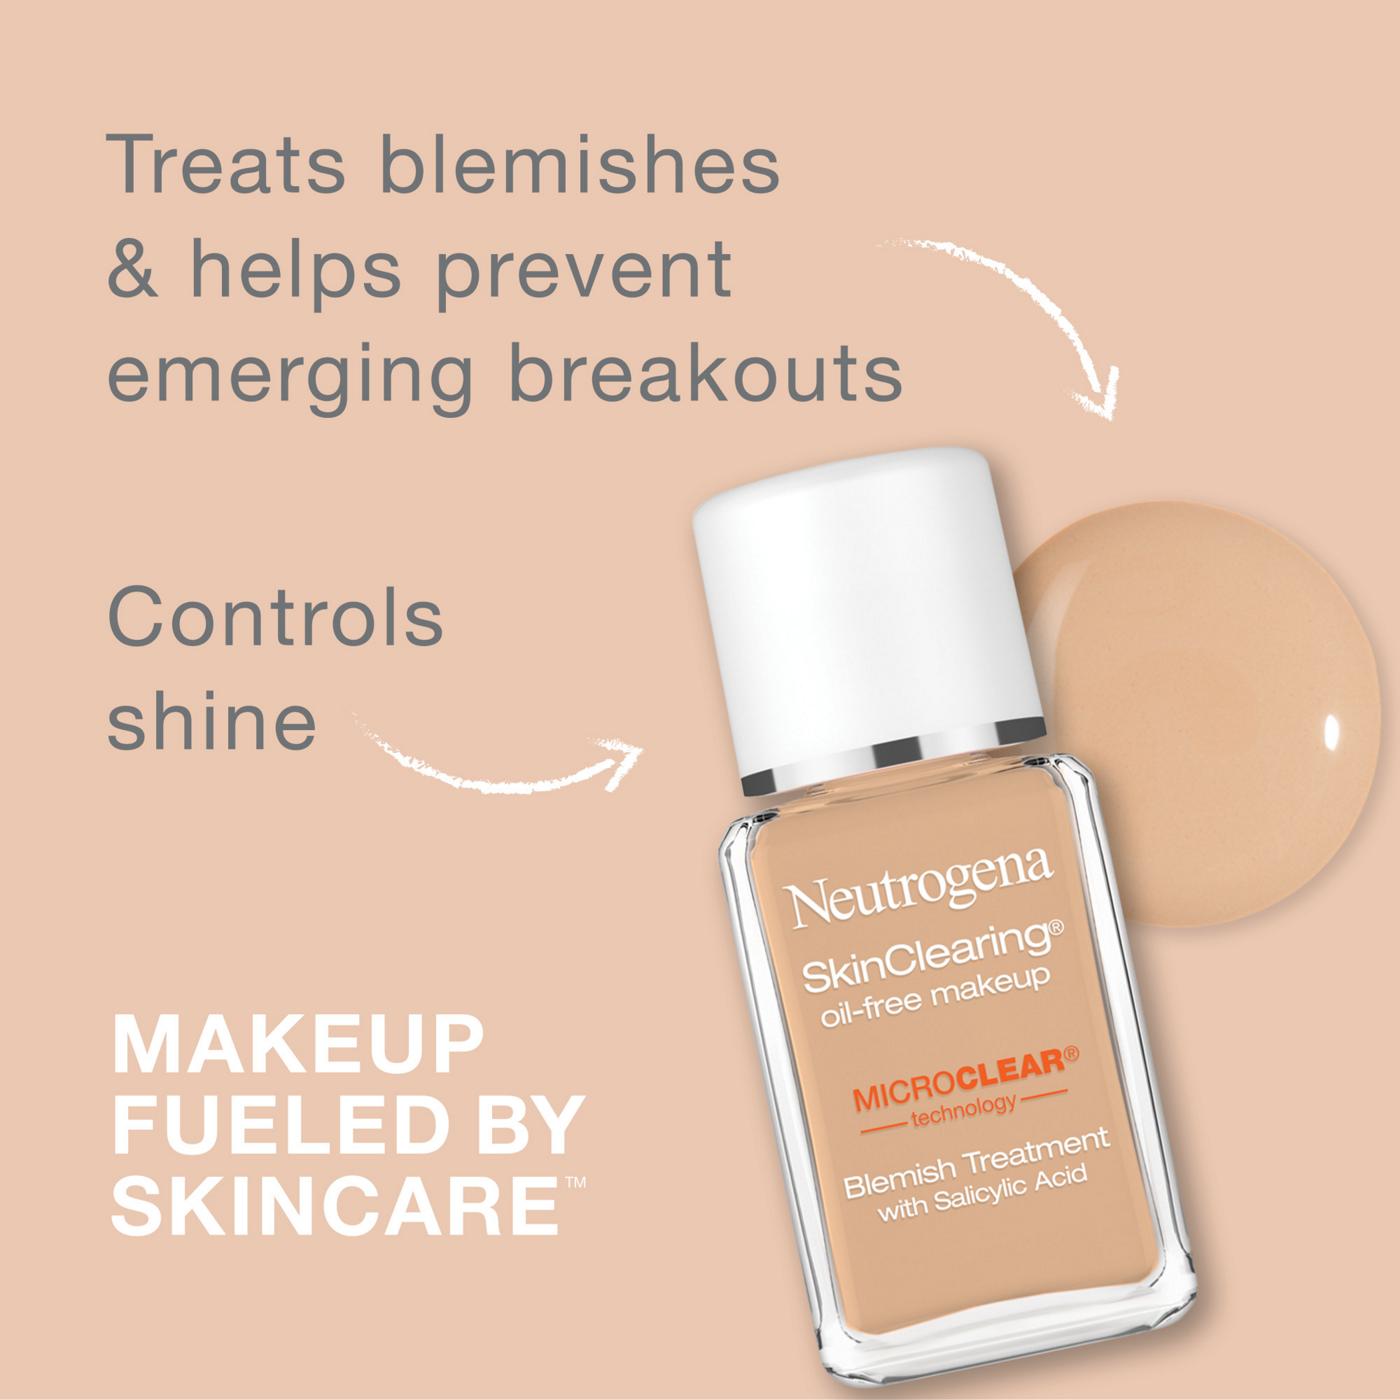 Neutrogena SkinClearing 20 Natural Ivory Oil-Free Makeup; image 6 of 8